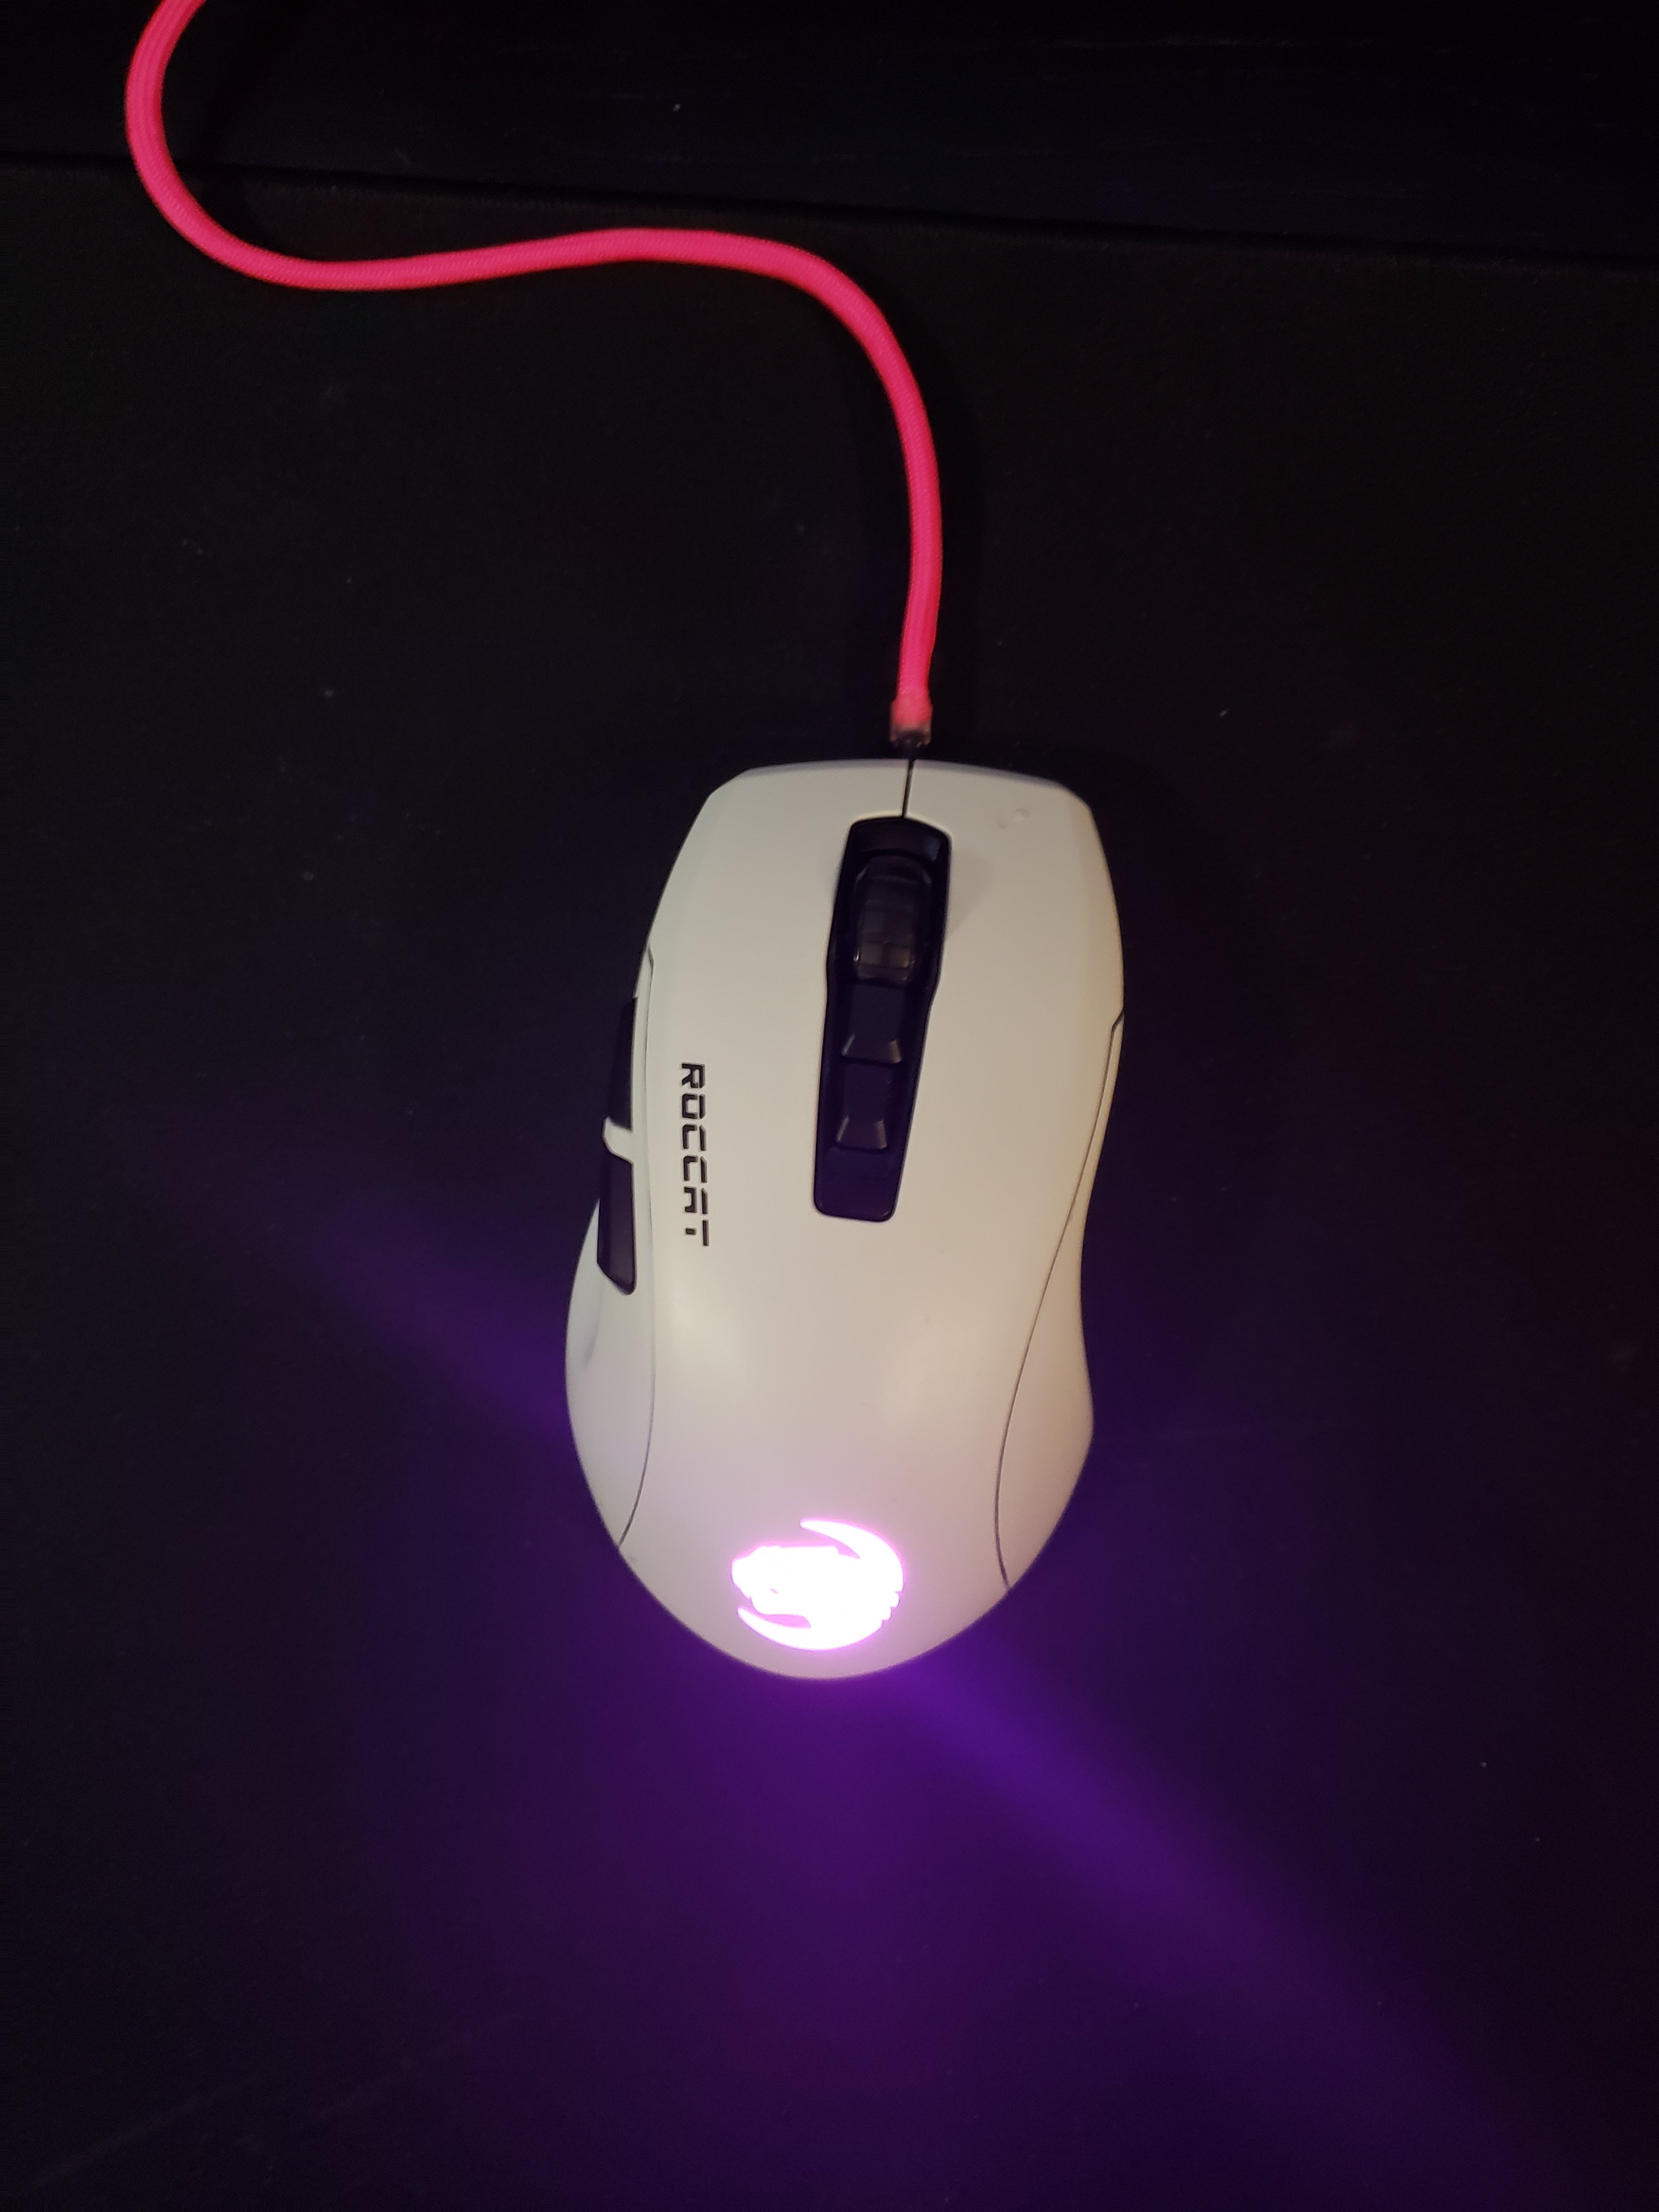 CSGOSwayze na Twitteru: "Yes! Finally managed to get my hands on the Kone Pure Ultra. And a special shout Spektrum Designs support for working with me to paracord this bad